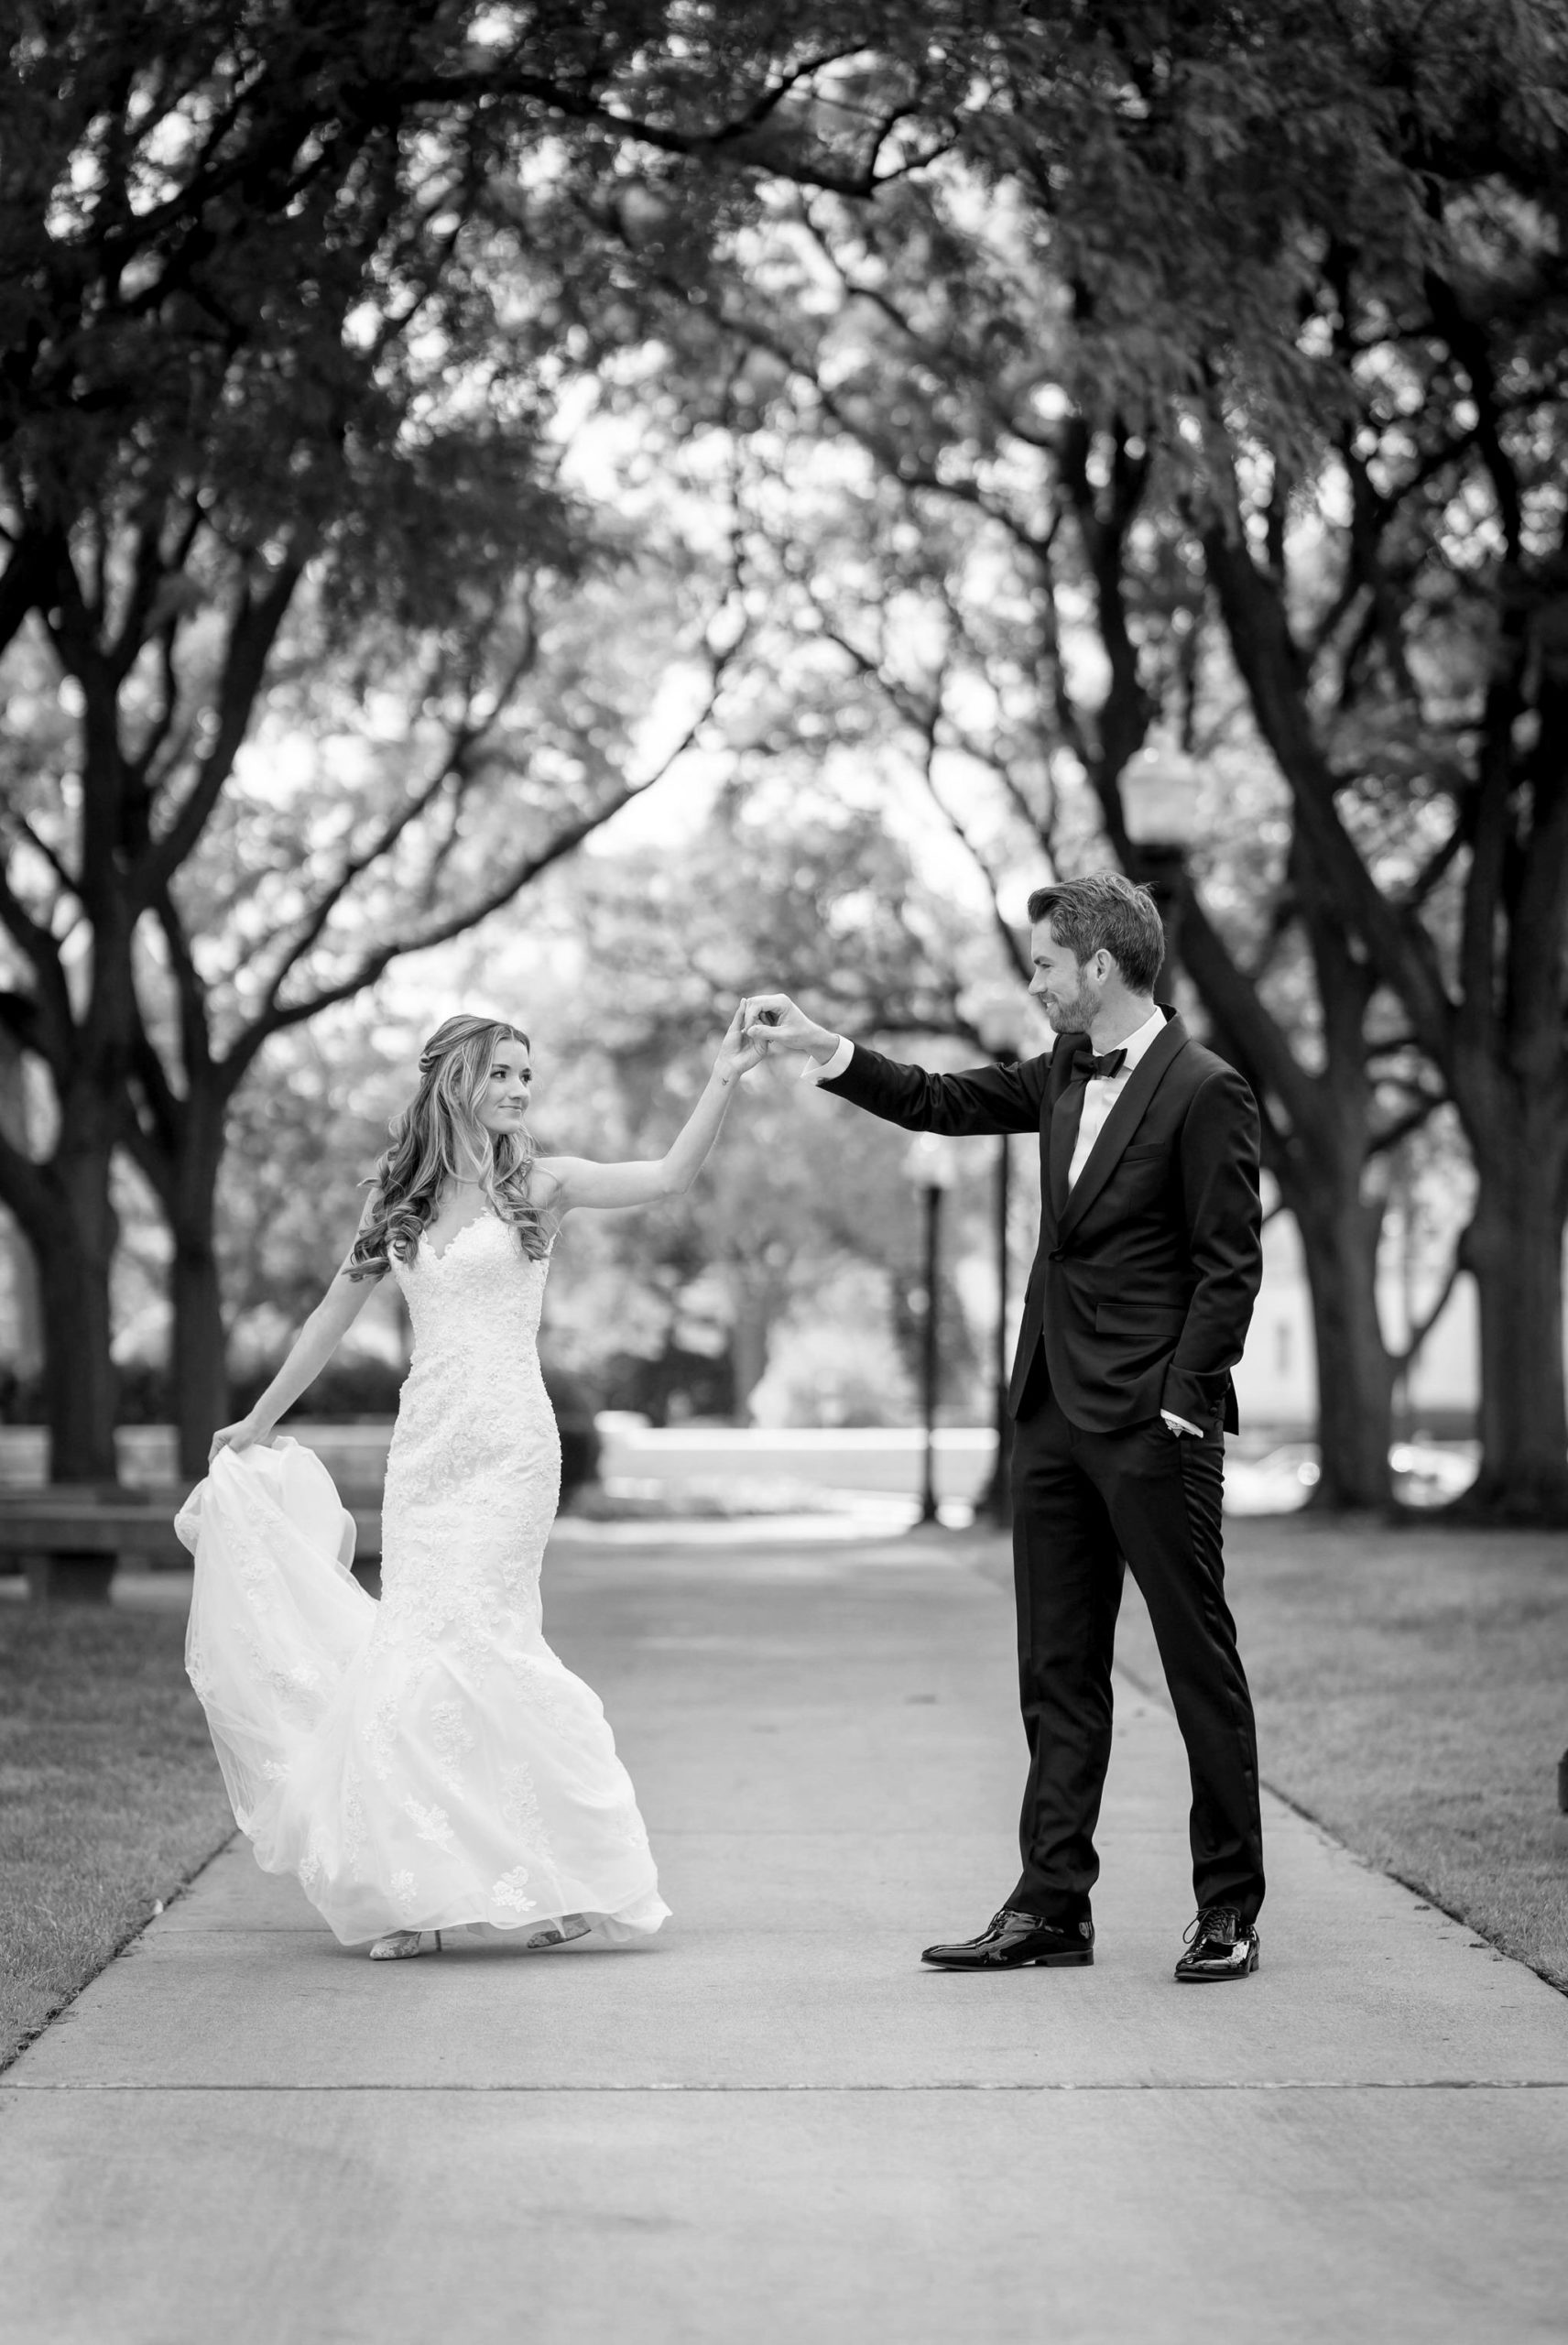 A bride twirls under the arm of her groom on her wedding day at the Detroit Institute of Art.